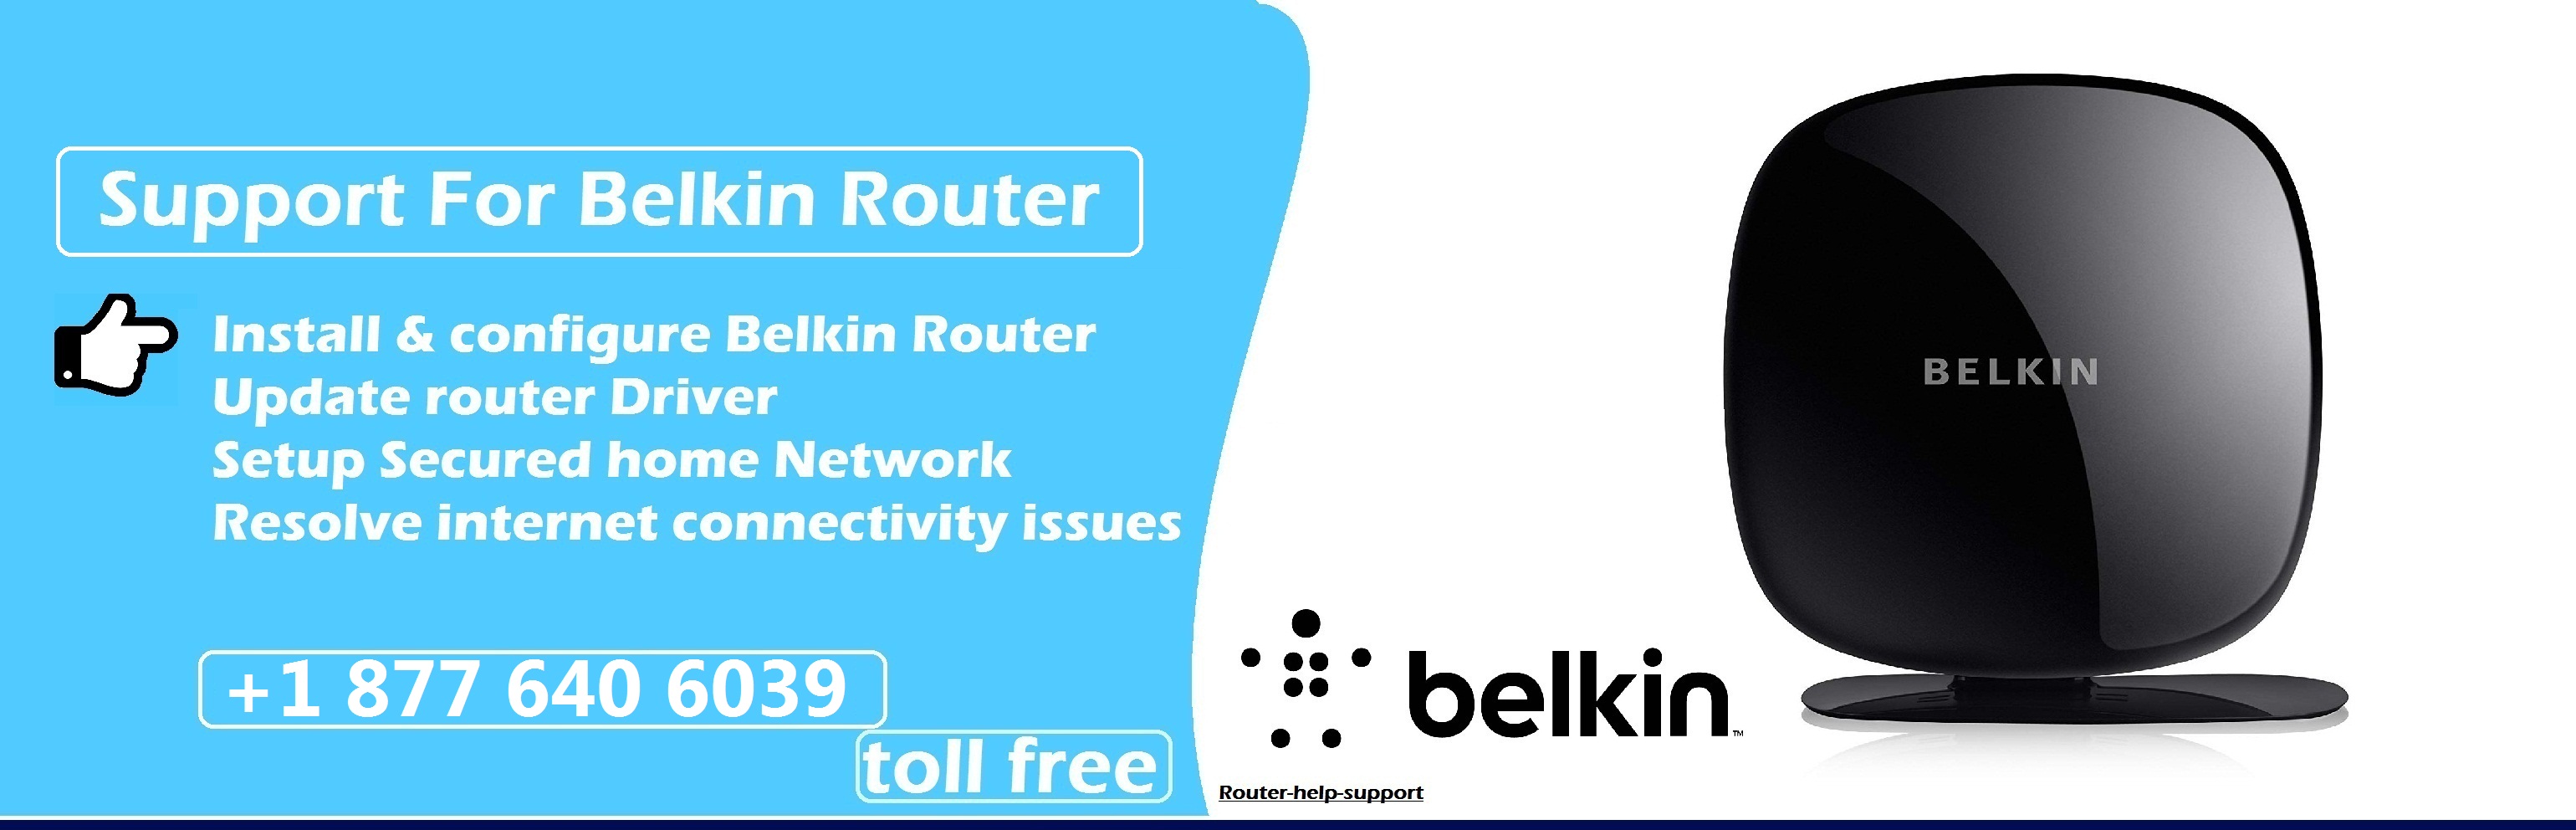 Manage your Belkin router to get better use